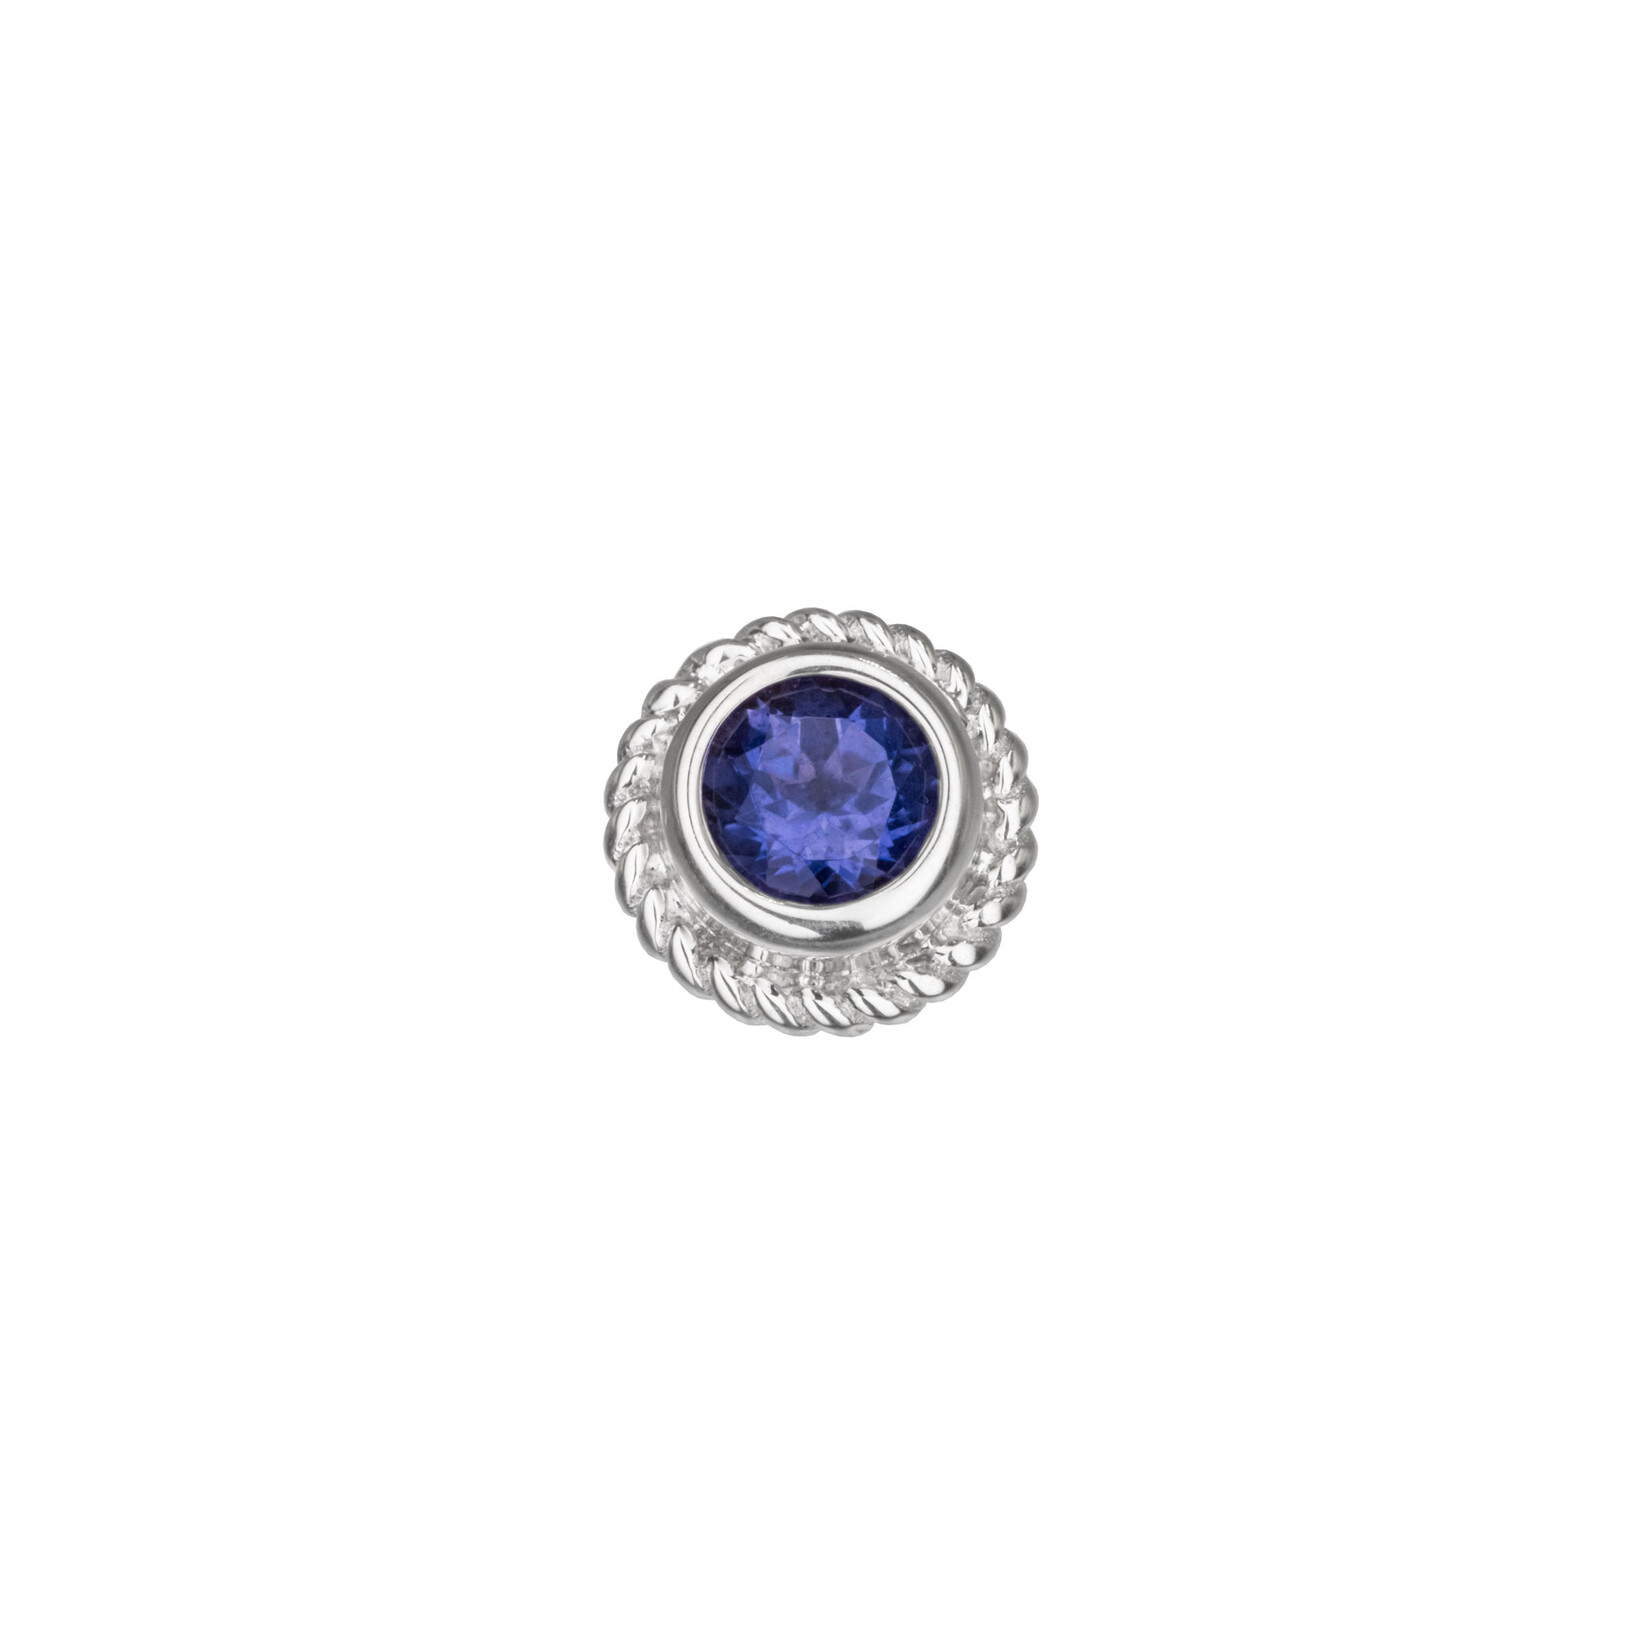 BVLA BVLA white gold 10.5 "Braided Choctaw" threaded end with iolite